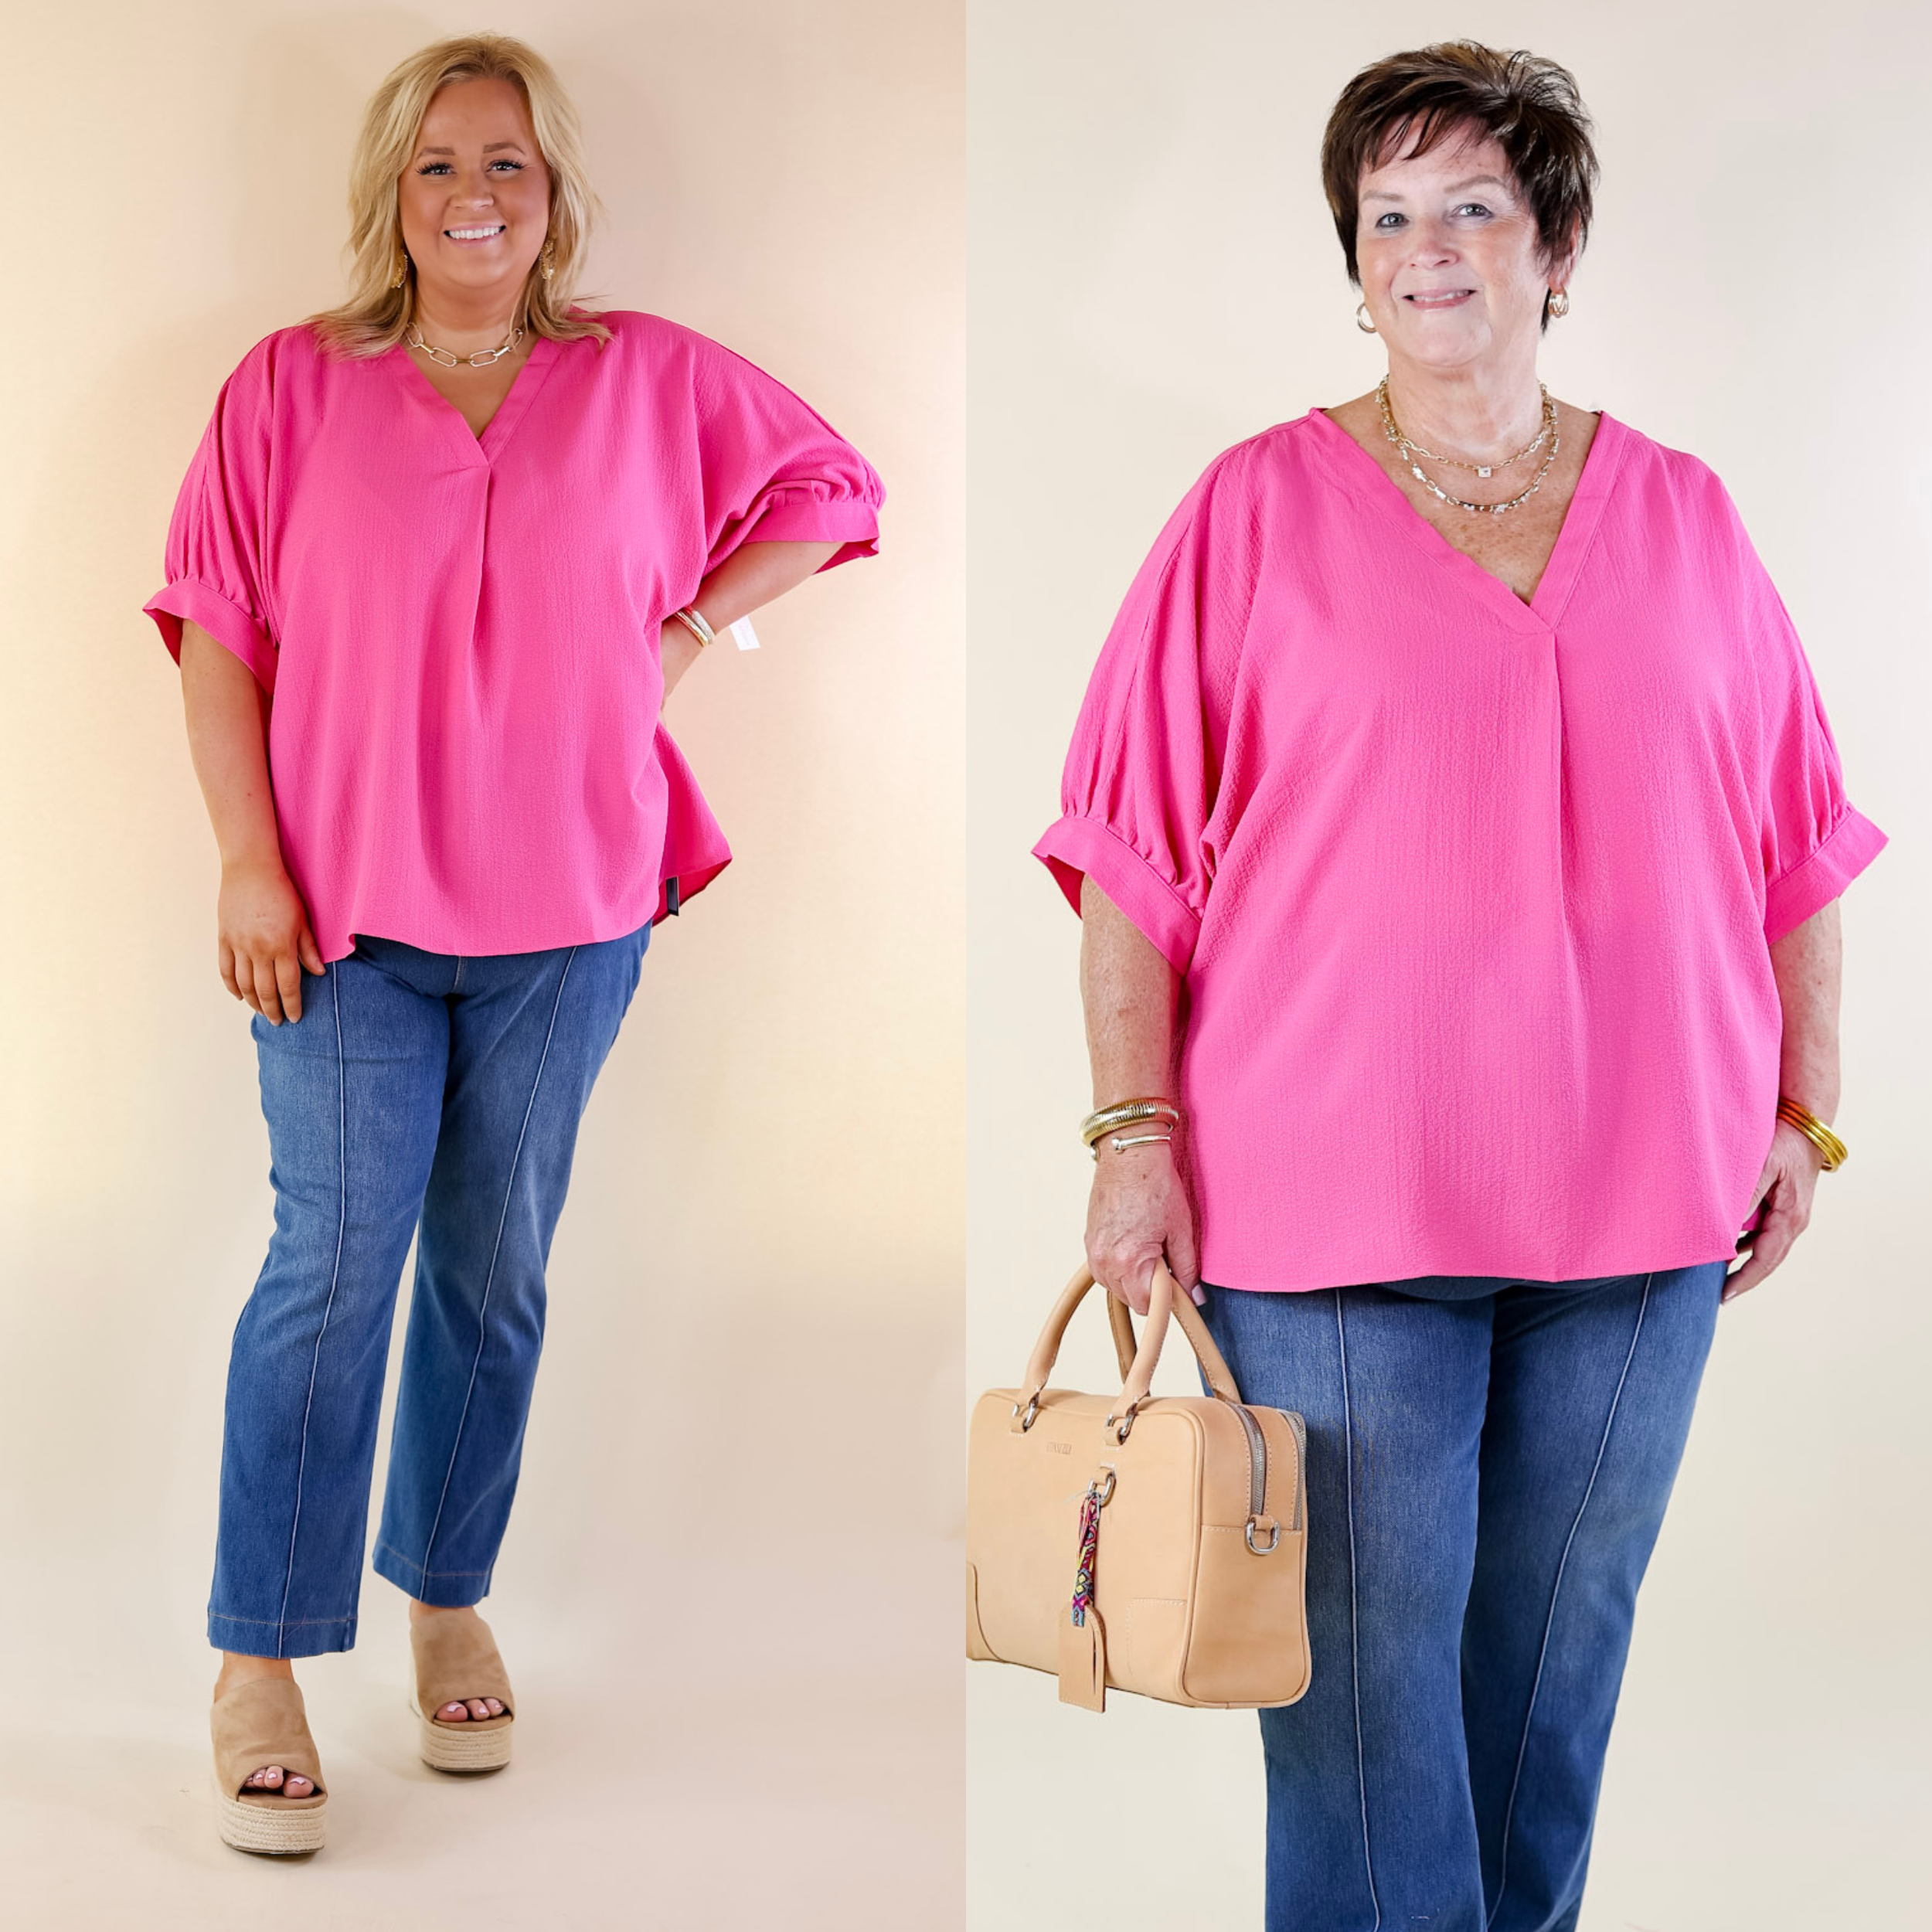 Chic and Charming V Neck Top with 3/4 Sleeves in Hot Pink - Giddy Up Glamour Boutique